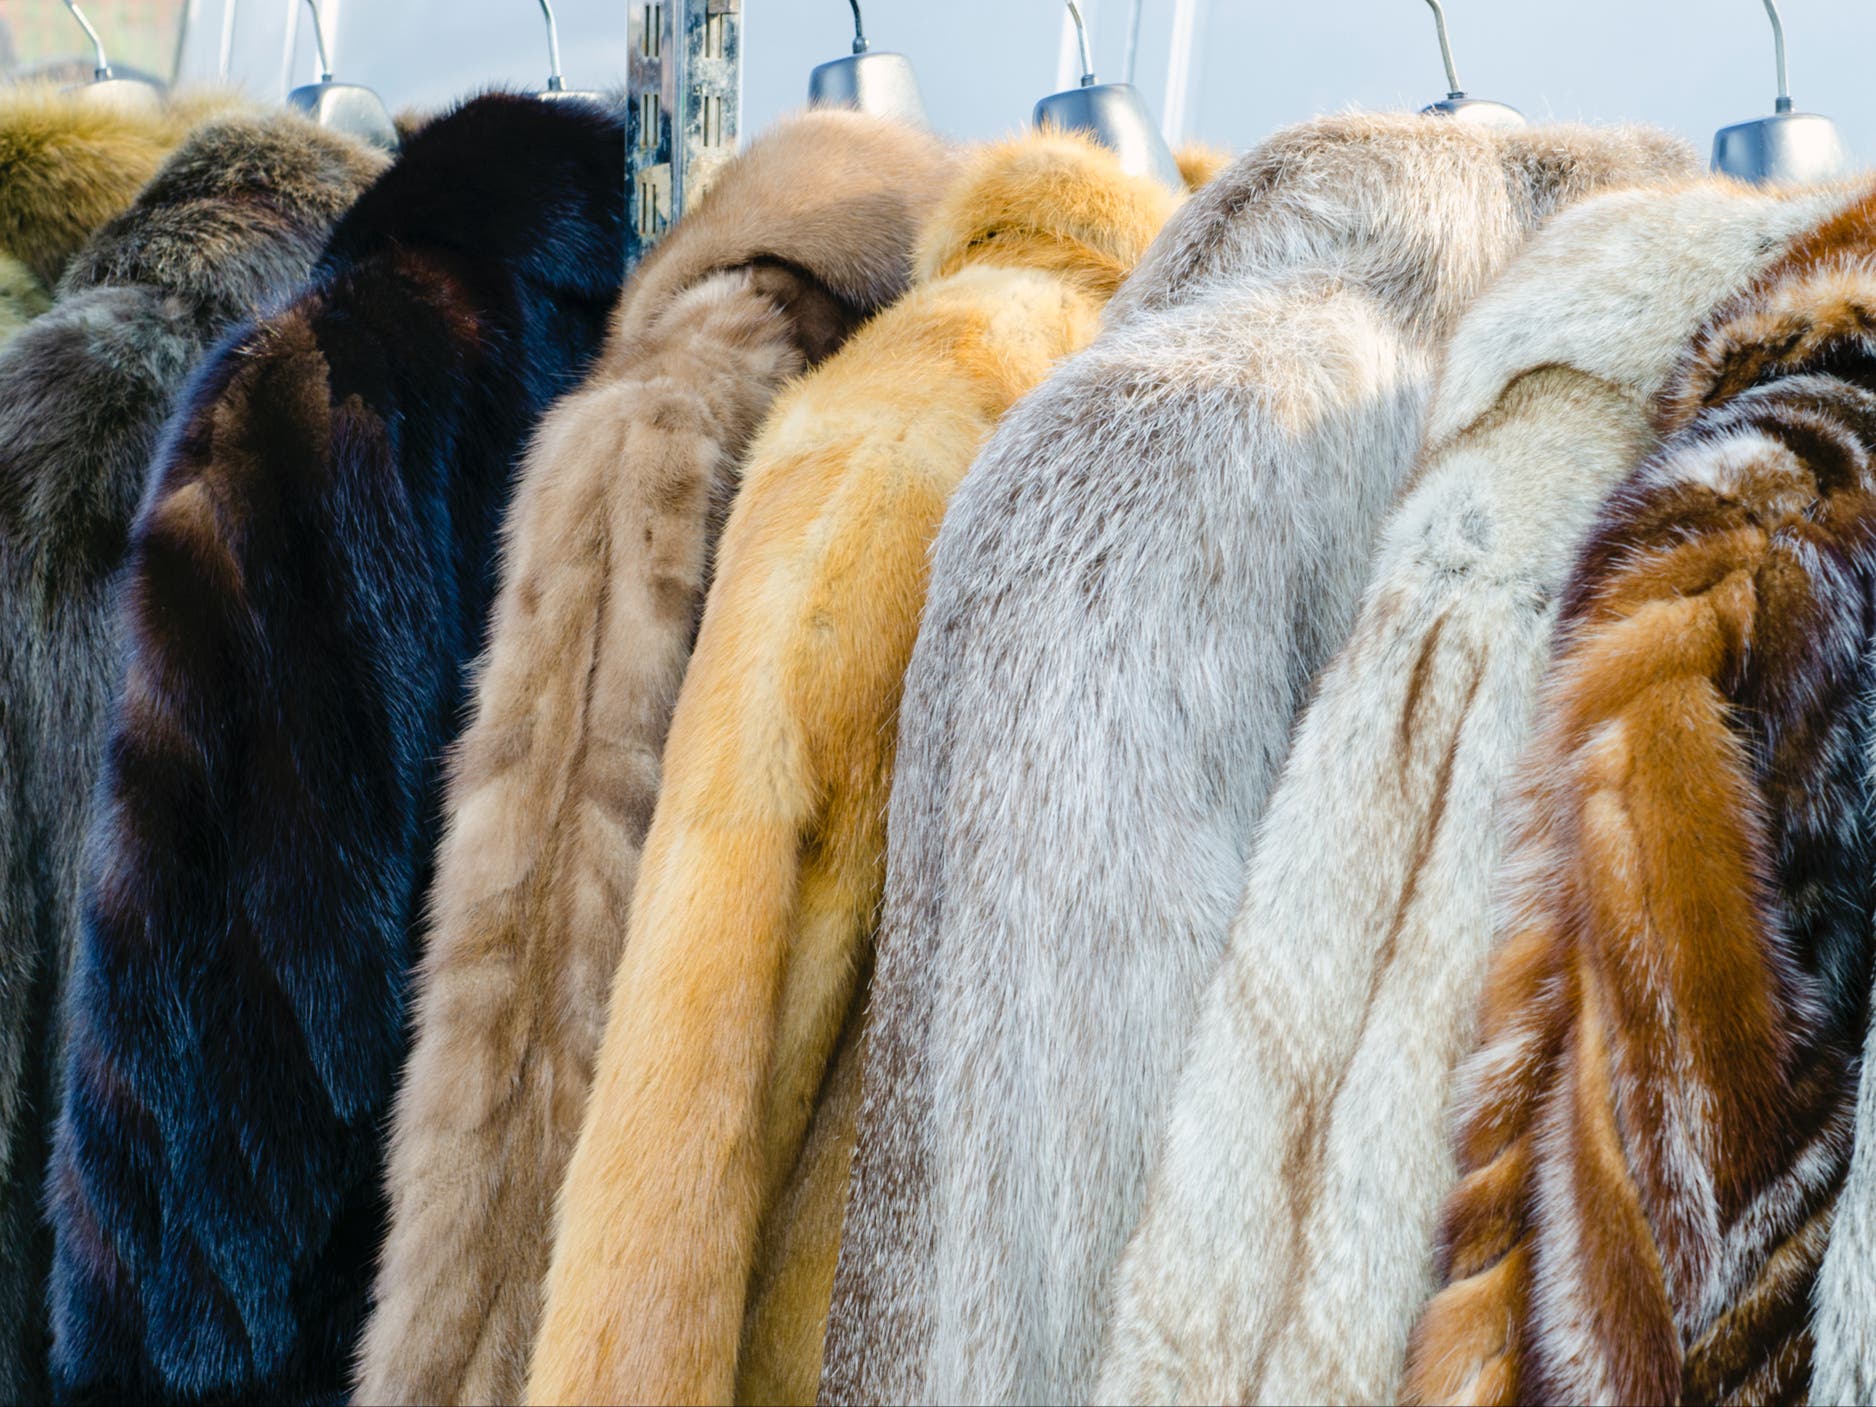 Buy or sell wild animal hides or antlers (native to Ontario) | bitcoinlove.fun